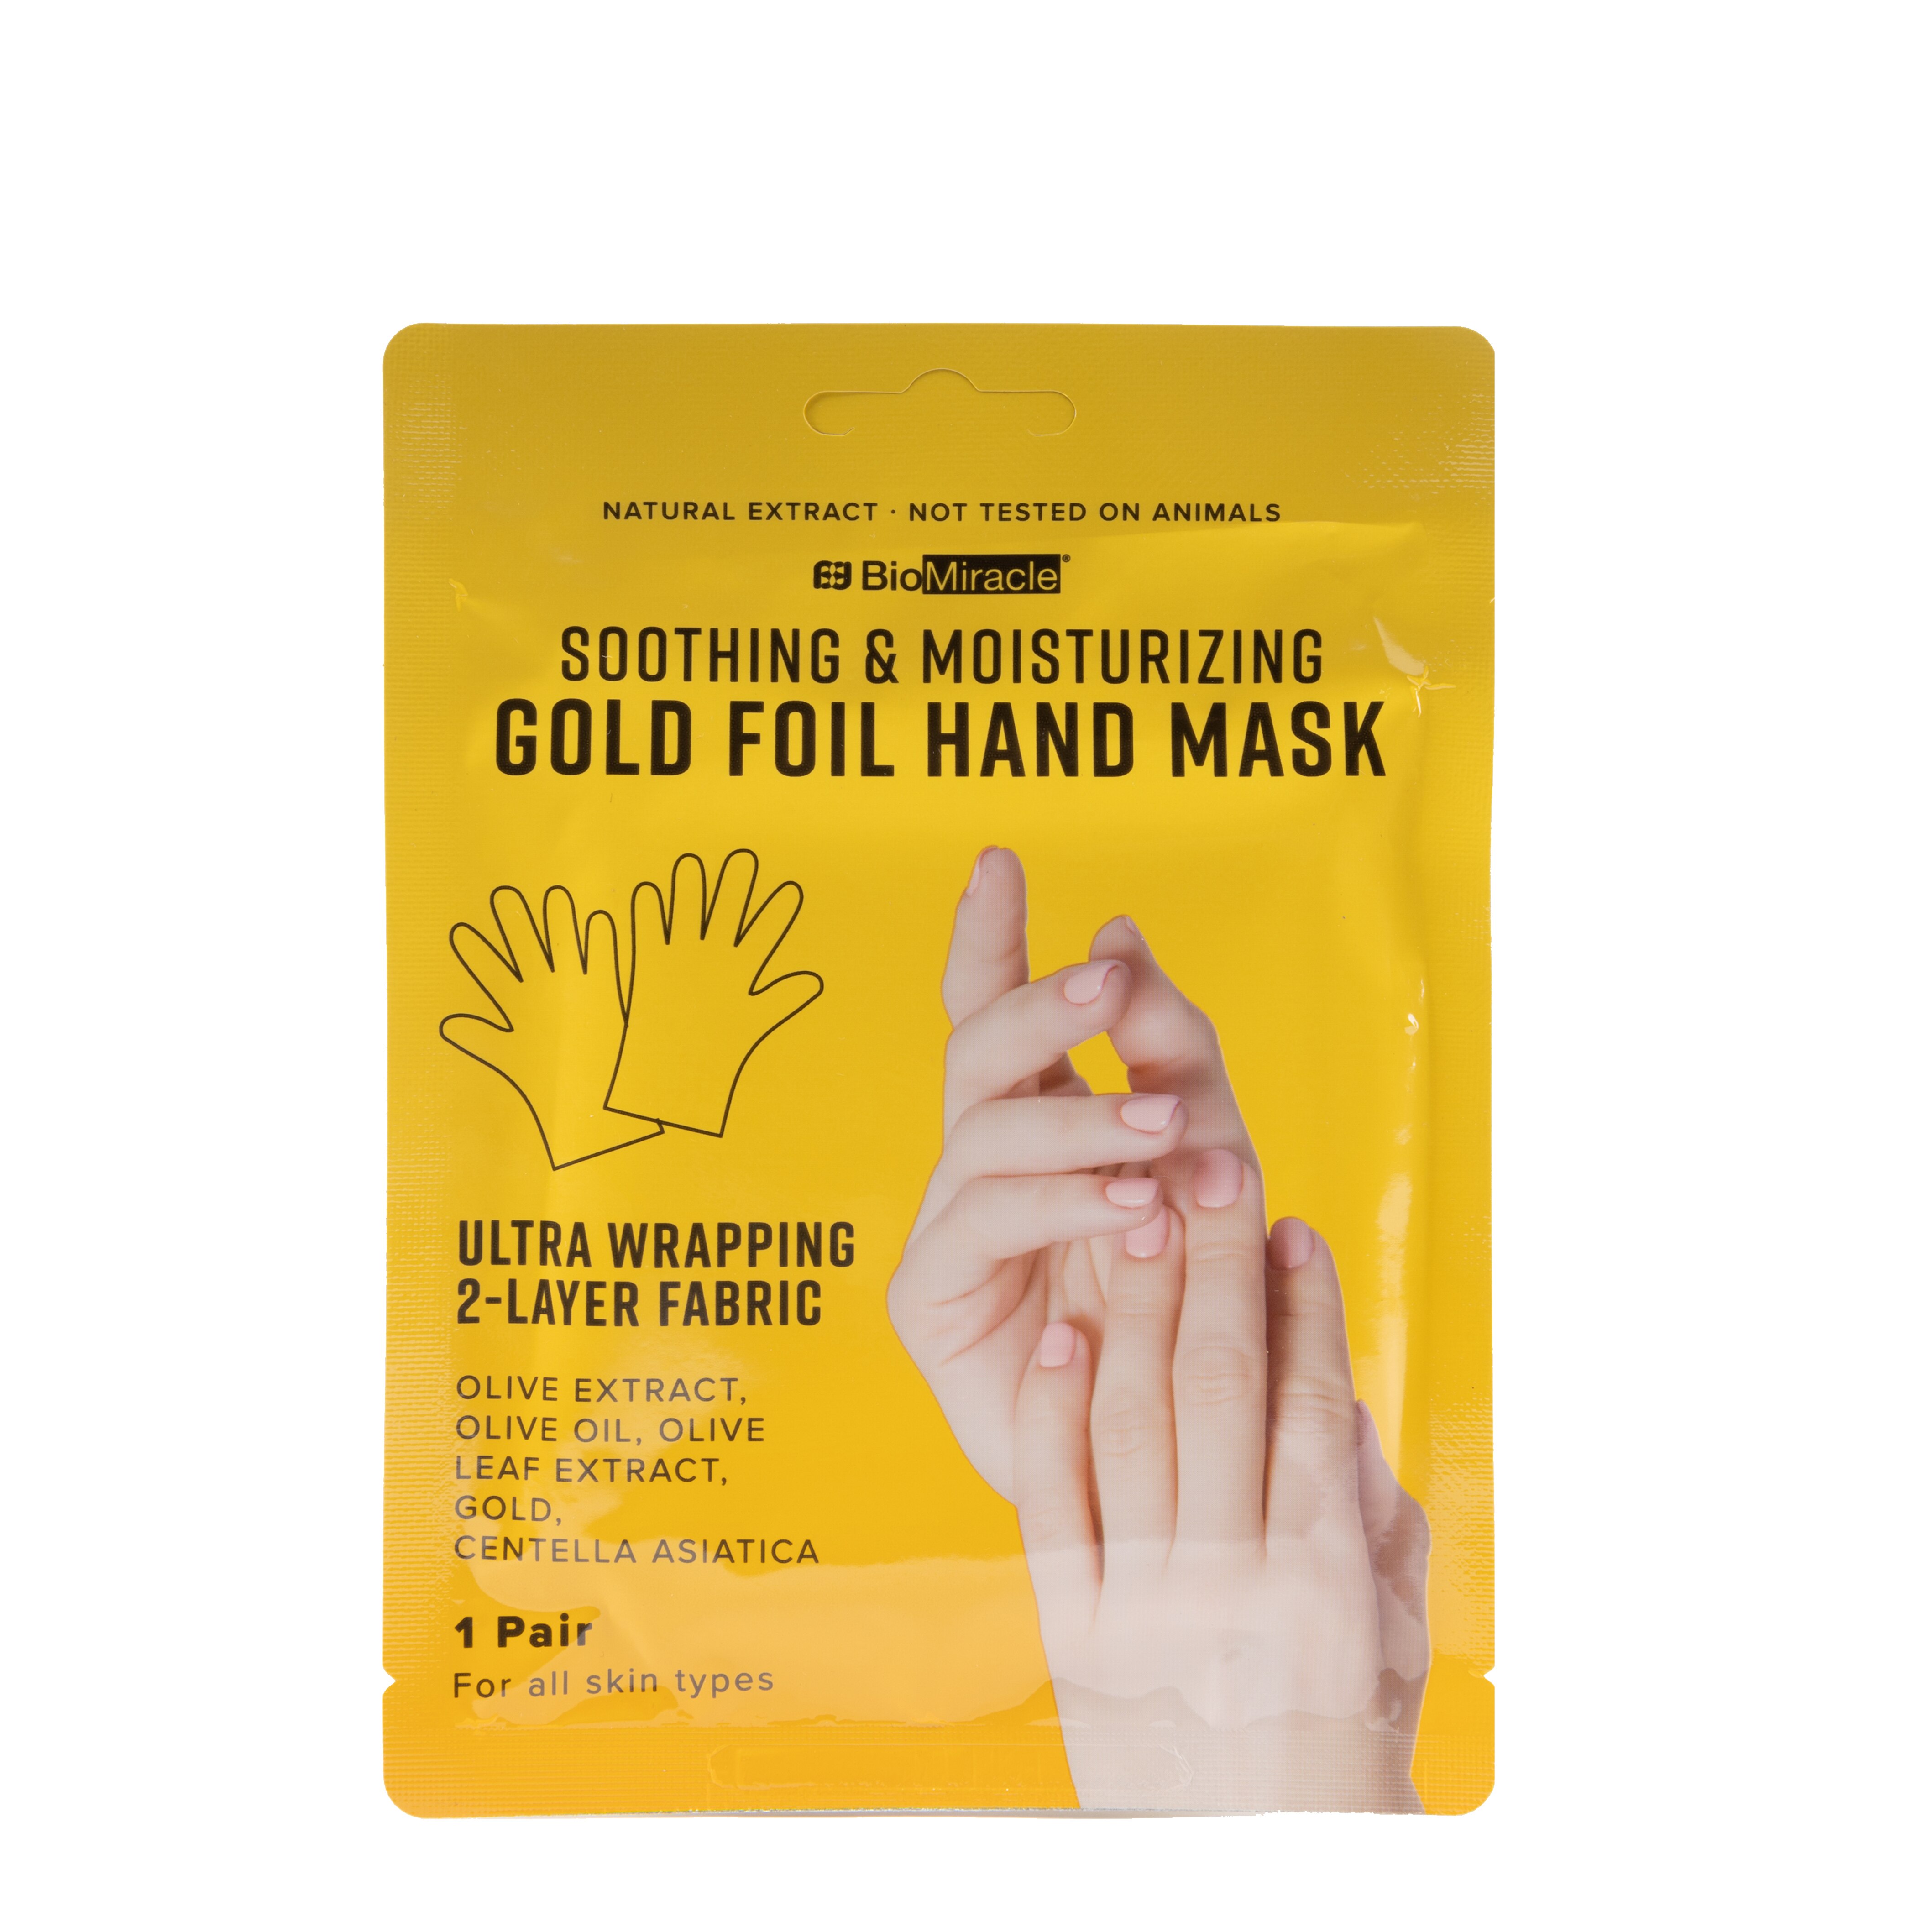 BioMiracle Soothing & Moisturizing Gold Foil Hand Mask